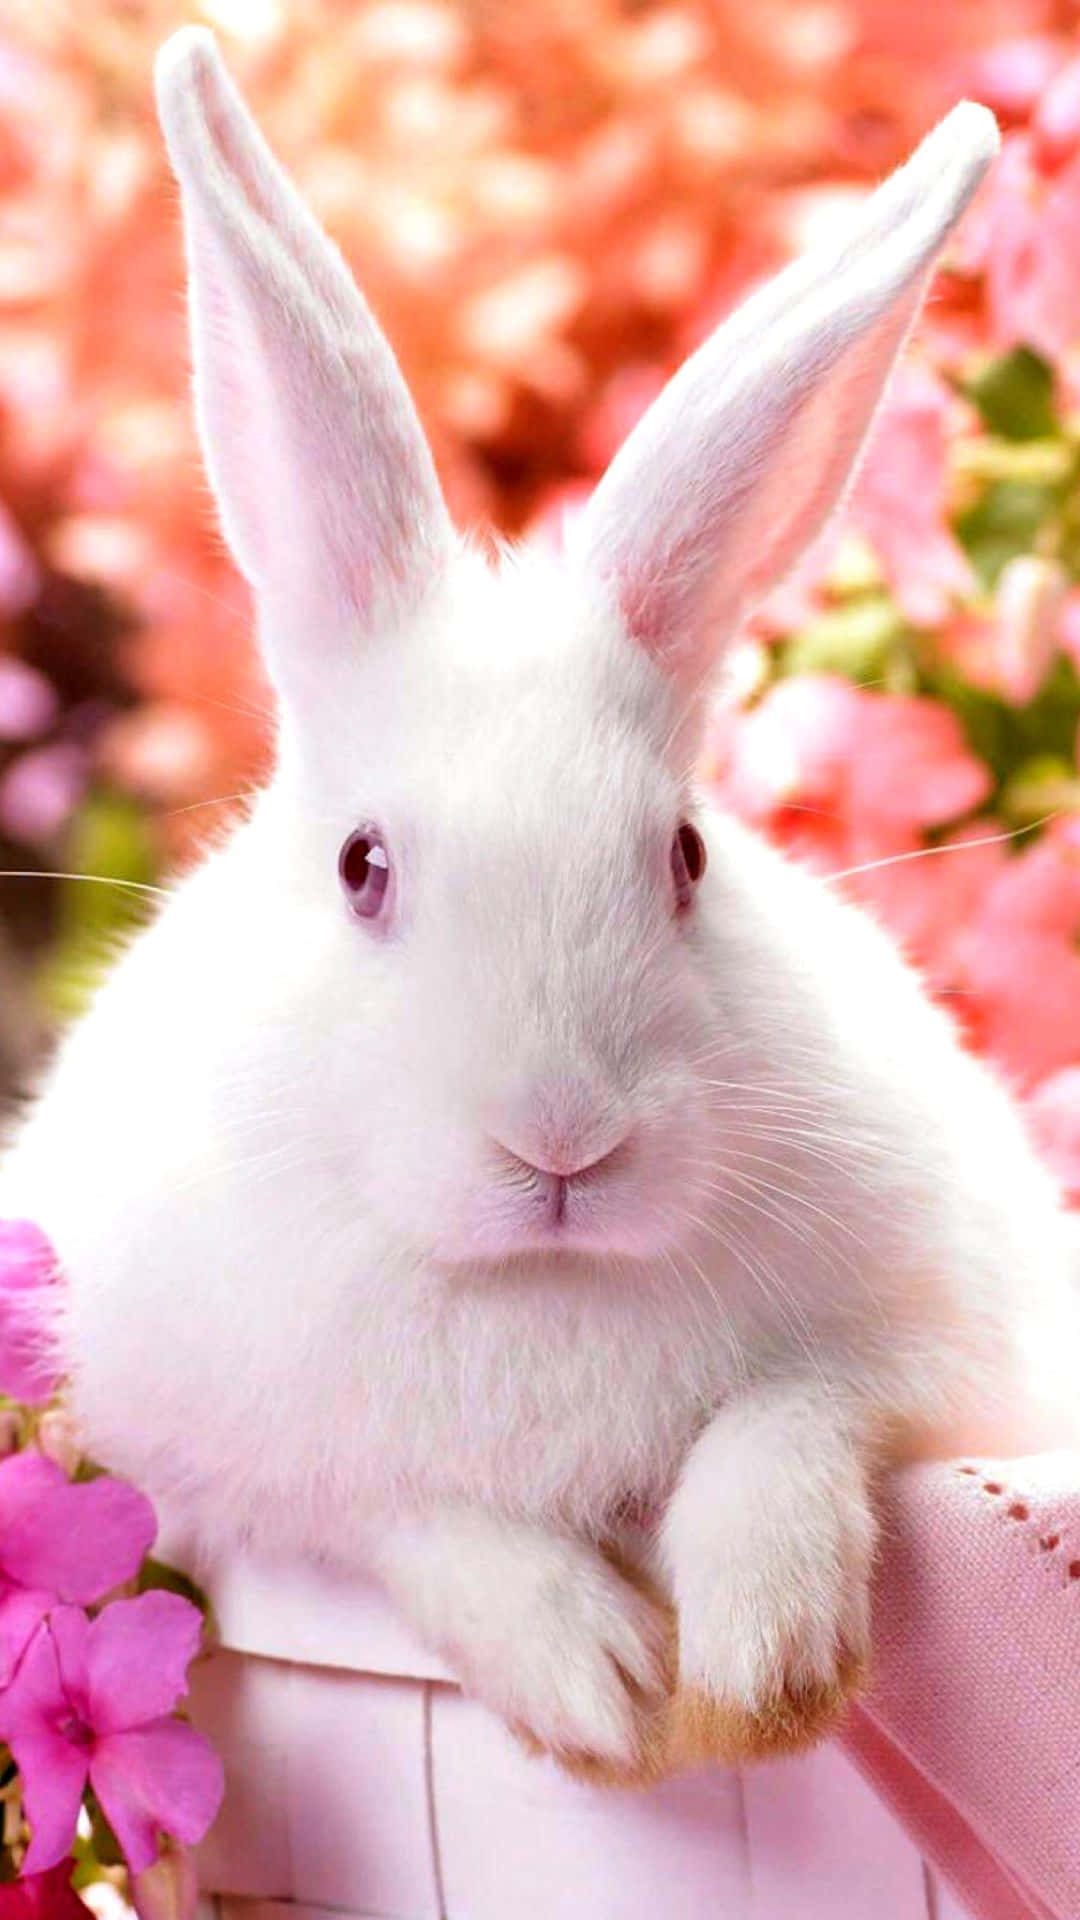 A White Rabbit Sitting In A Basket With Pink Flowers Wallpaper